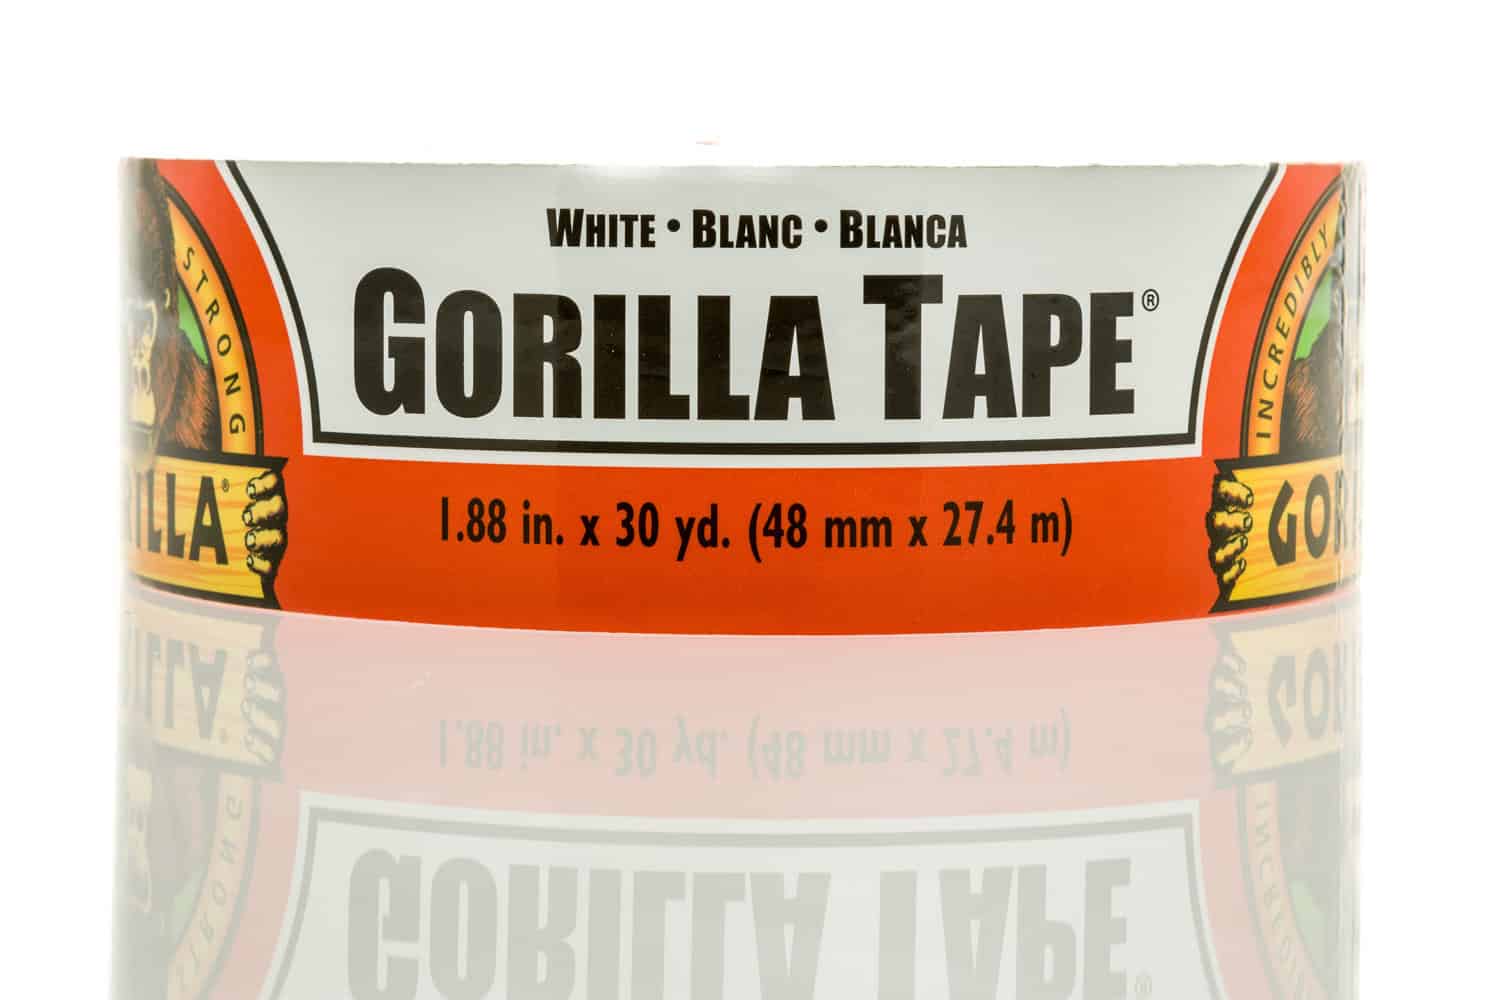  Roll of Gorilla tape on an isolated background.